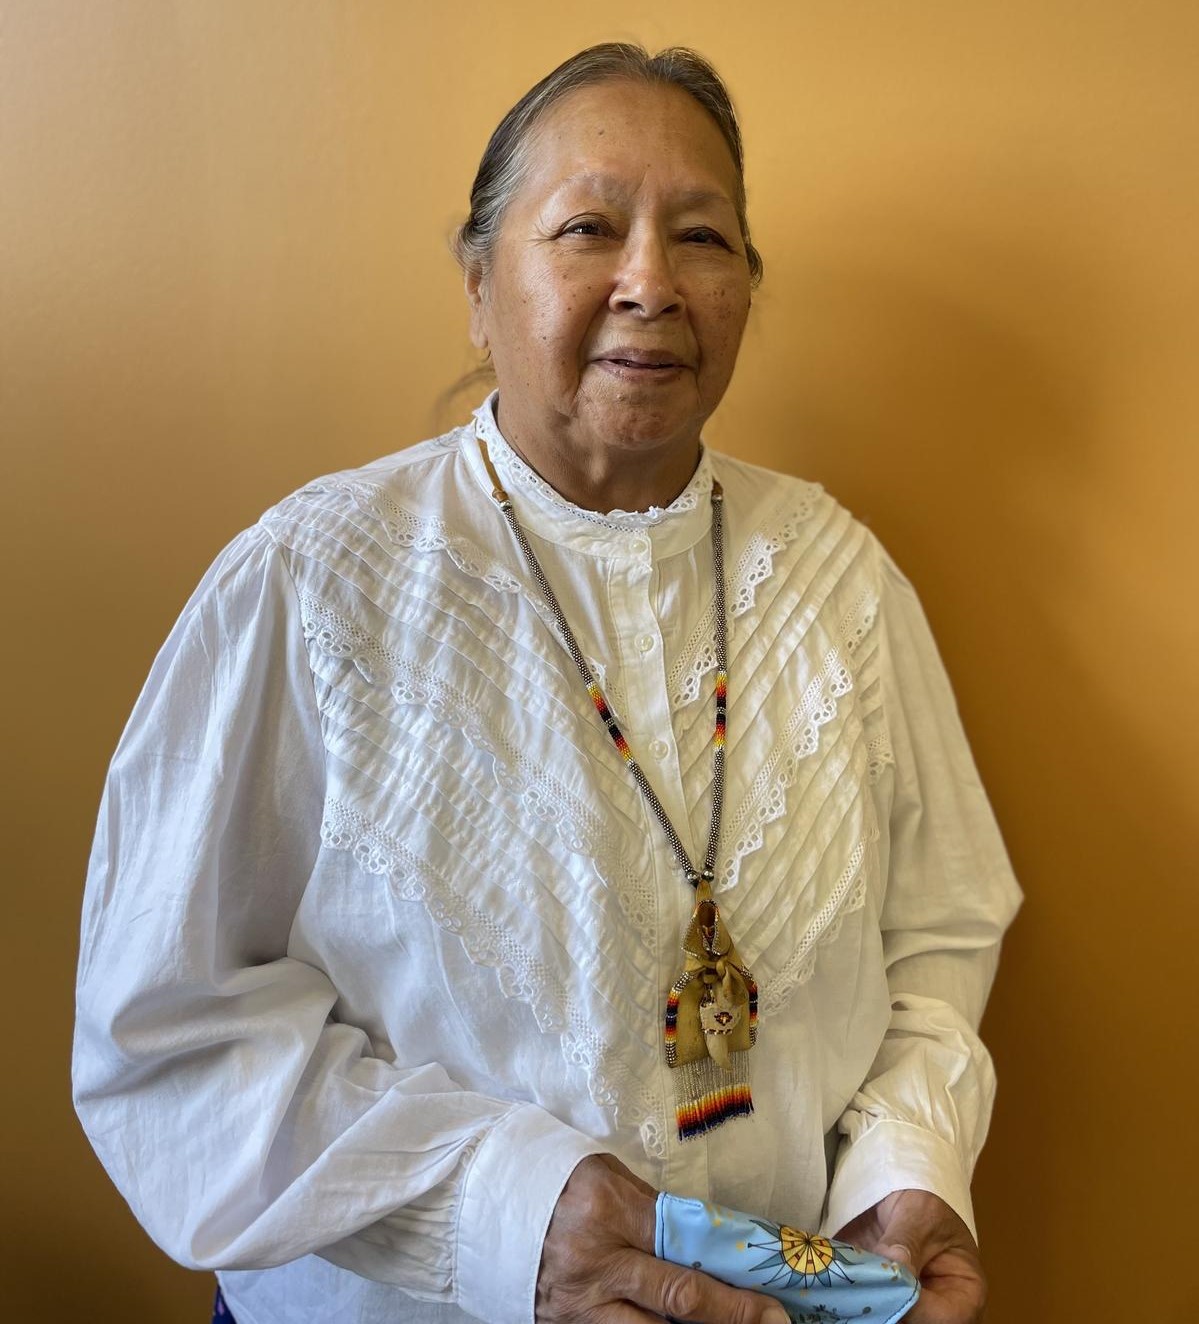 headshot of Elder in Residence (2023) Nelda Goodman. Nelda is pictured against an orange wall wearing a white cloth shirt.She is smiling and holds a patterned cloth. She is wearing a traditional medicine bag around her neck.